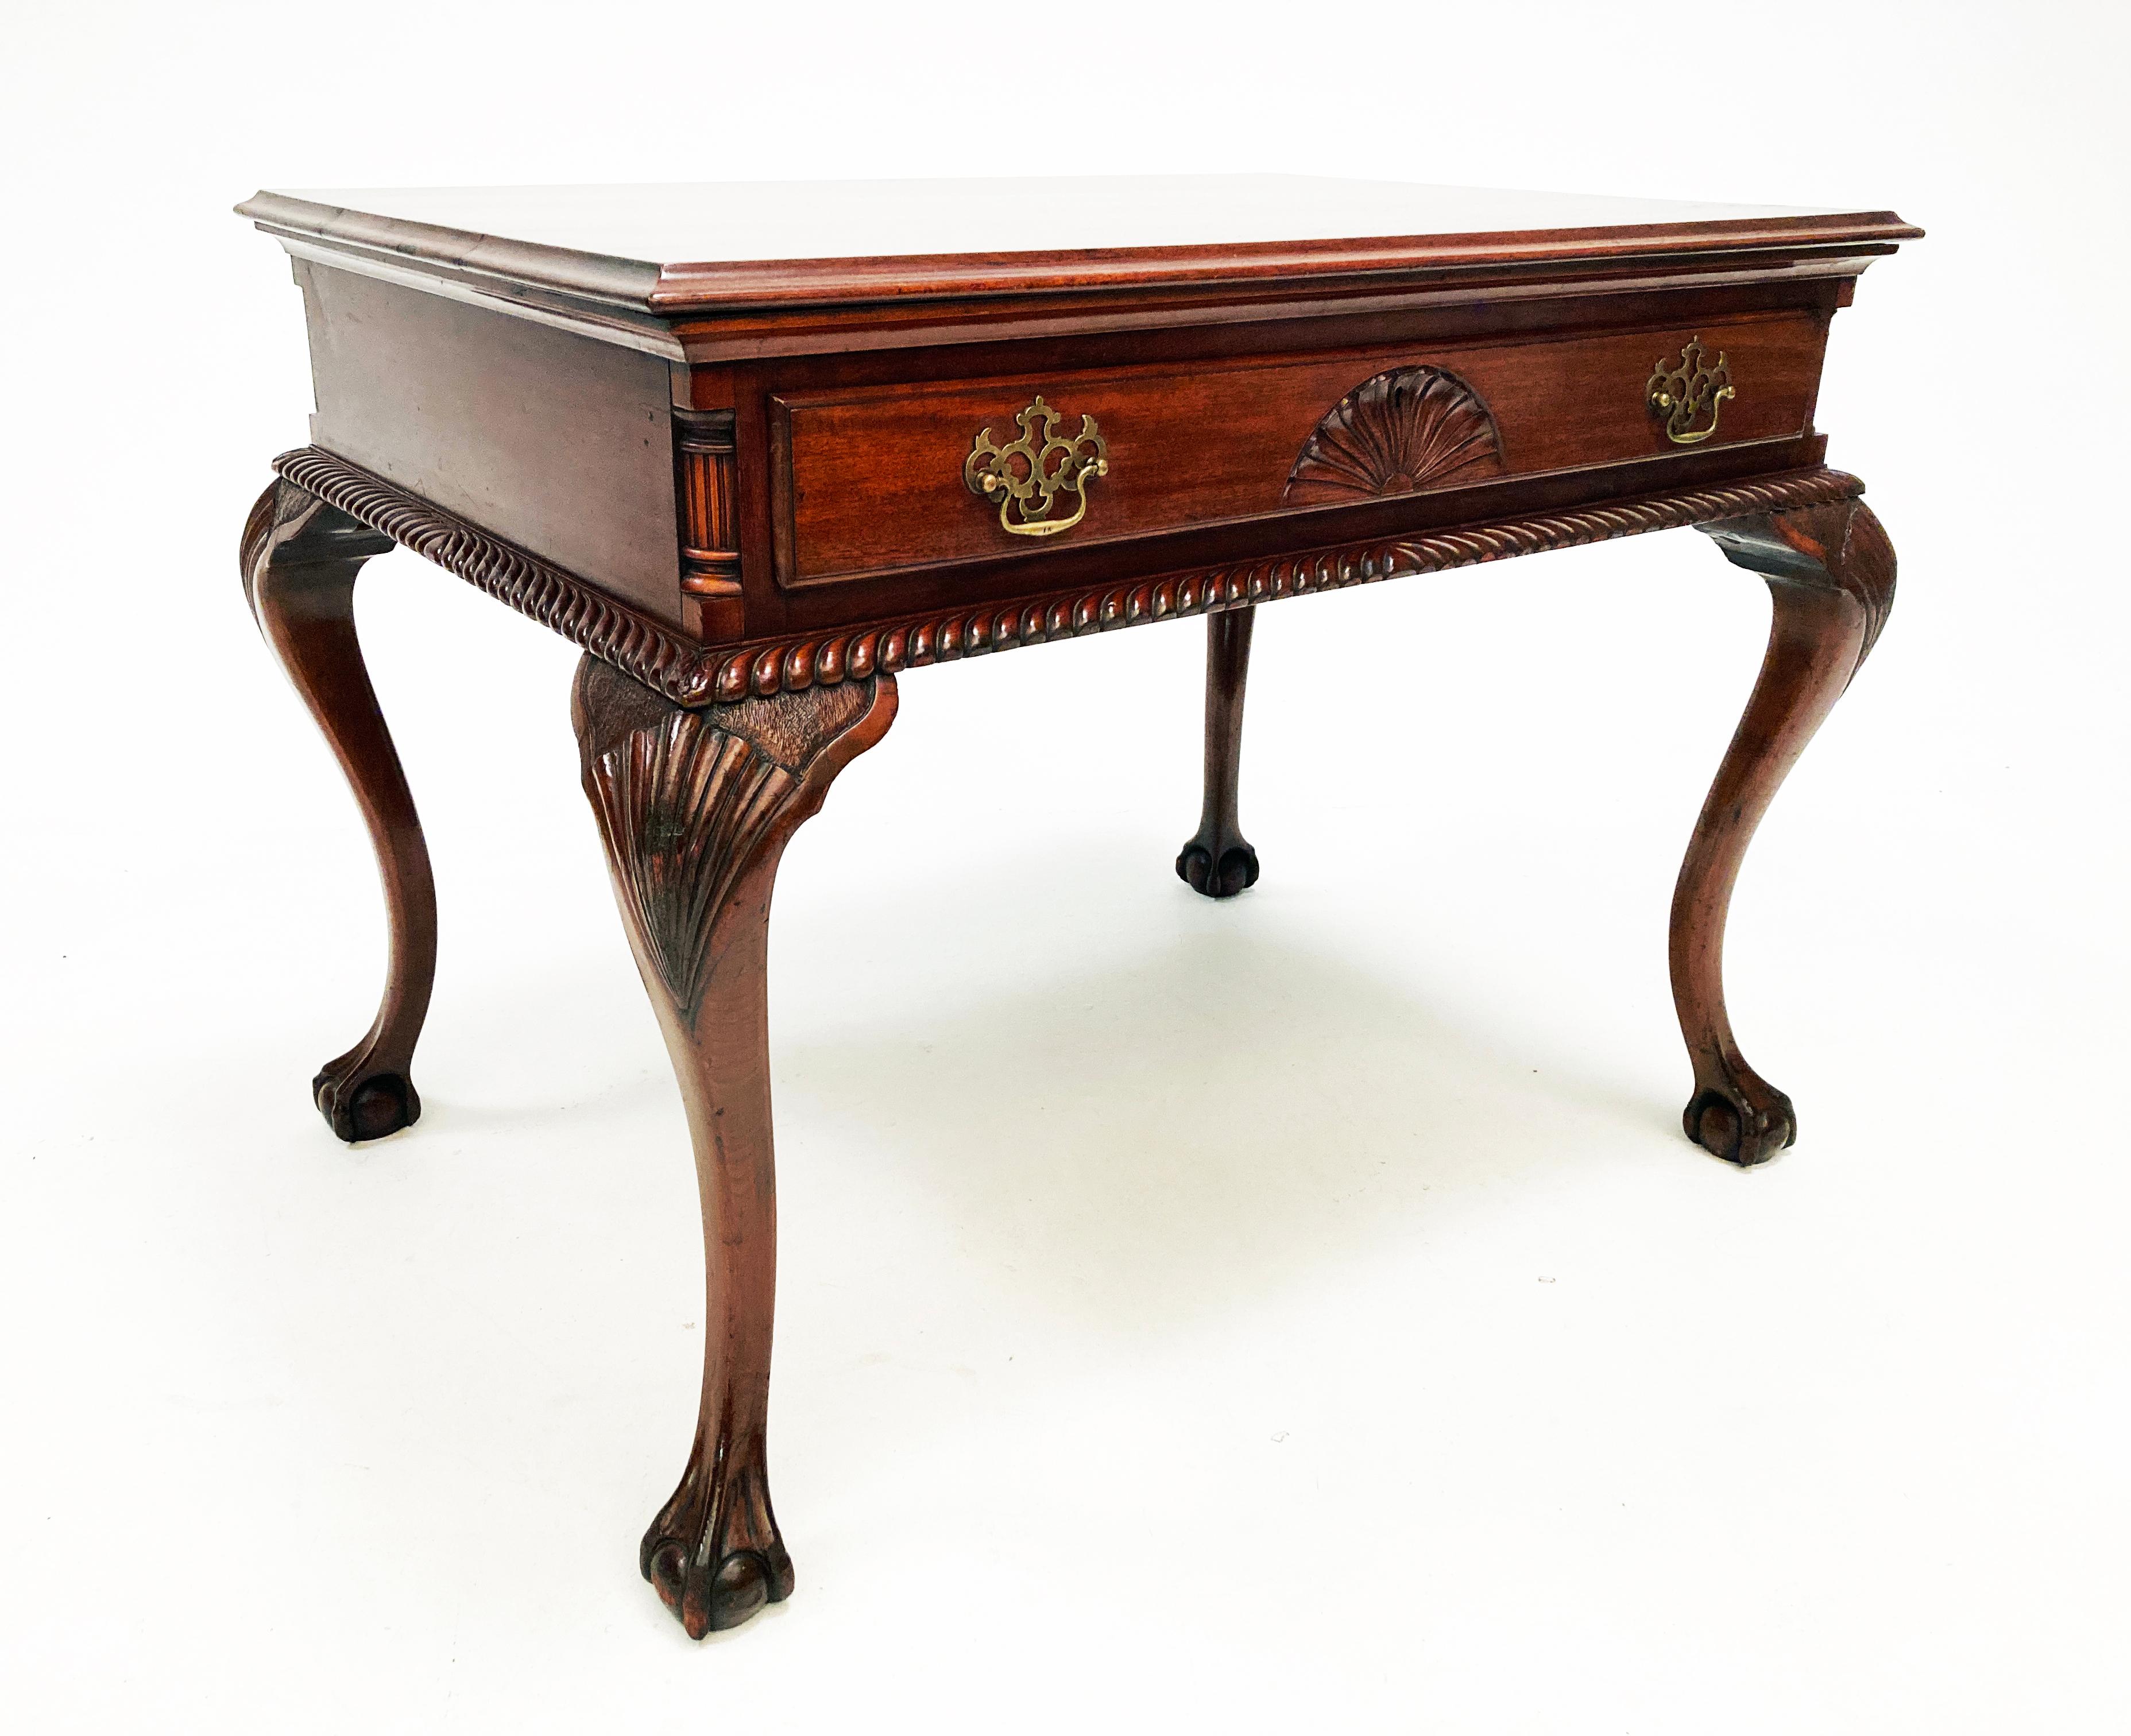 For the discerning eye, this table/desk is an amazing example of beautiful English Chippendale design with exemplary 19th century craftsmanship. From ornately hand carved cabriole legs, to exquisite skirting detail, finished with gorgeous brass